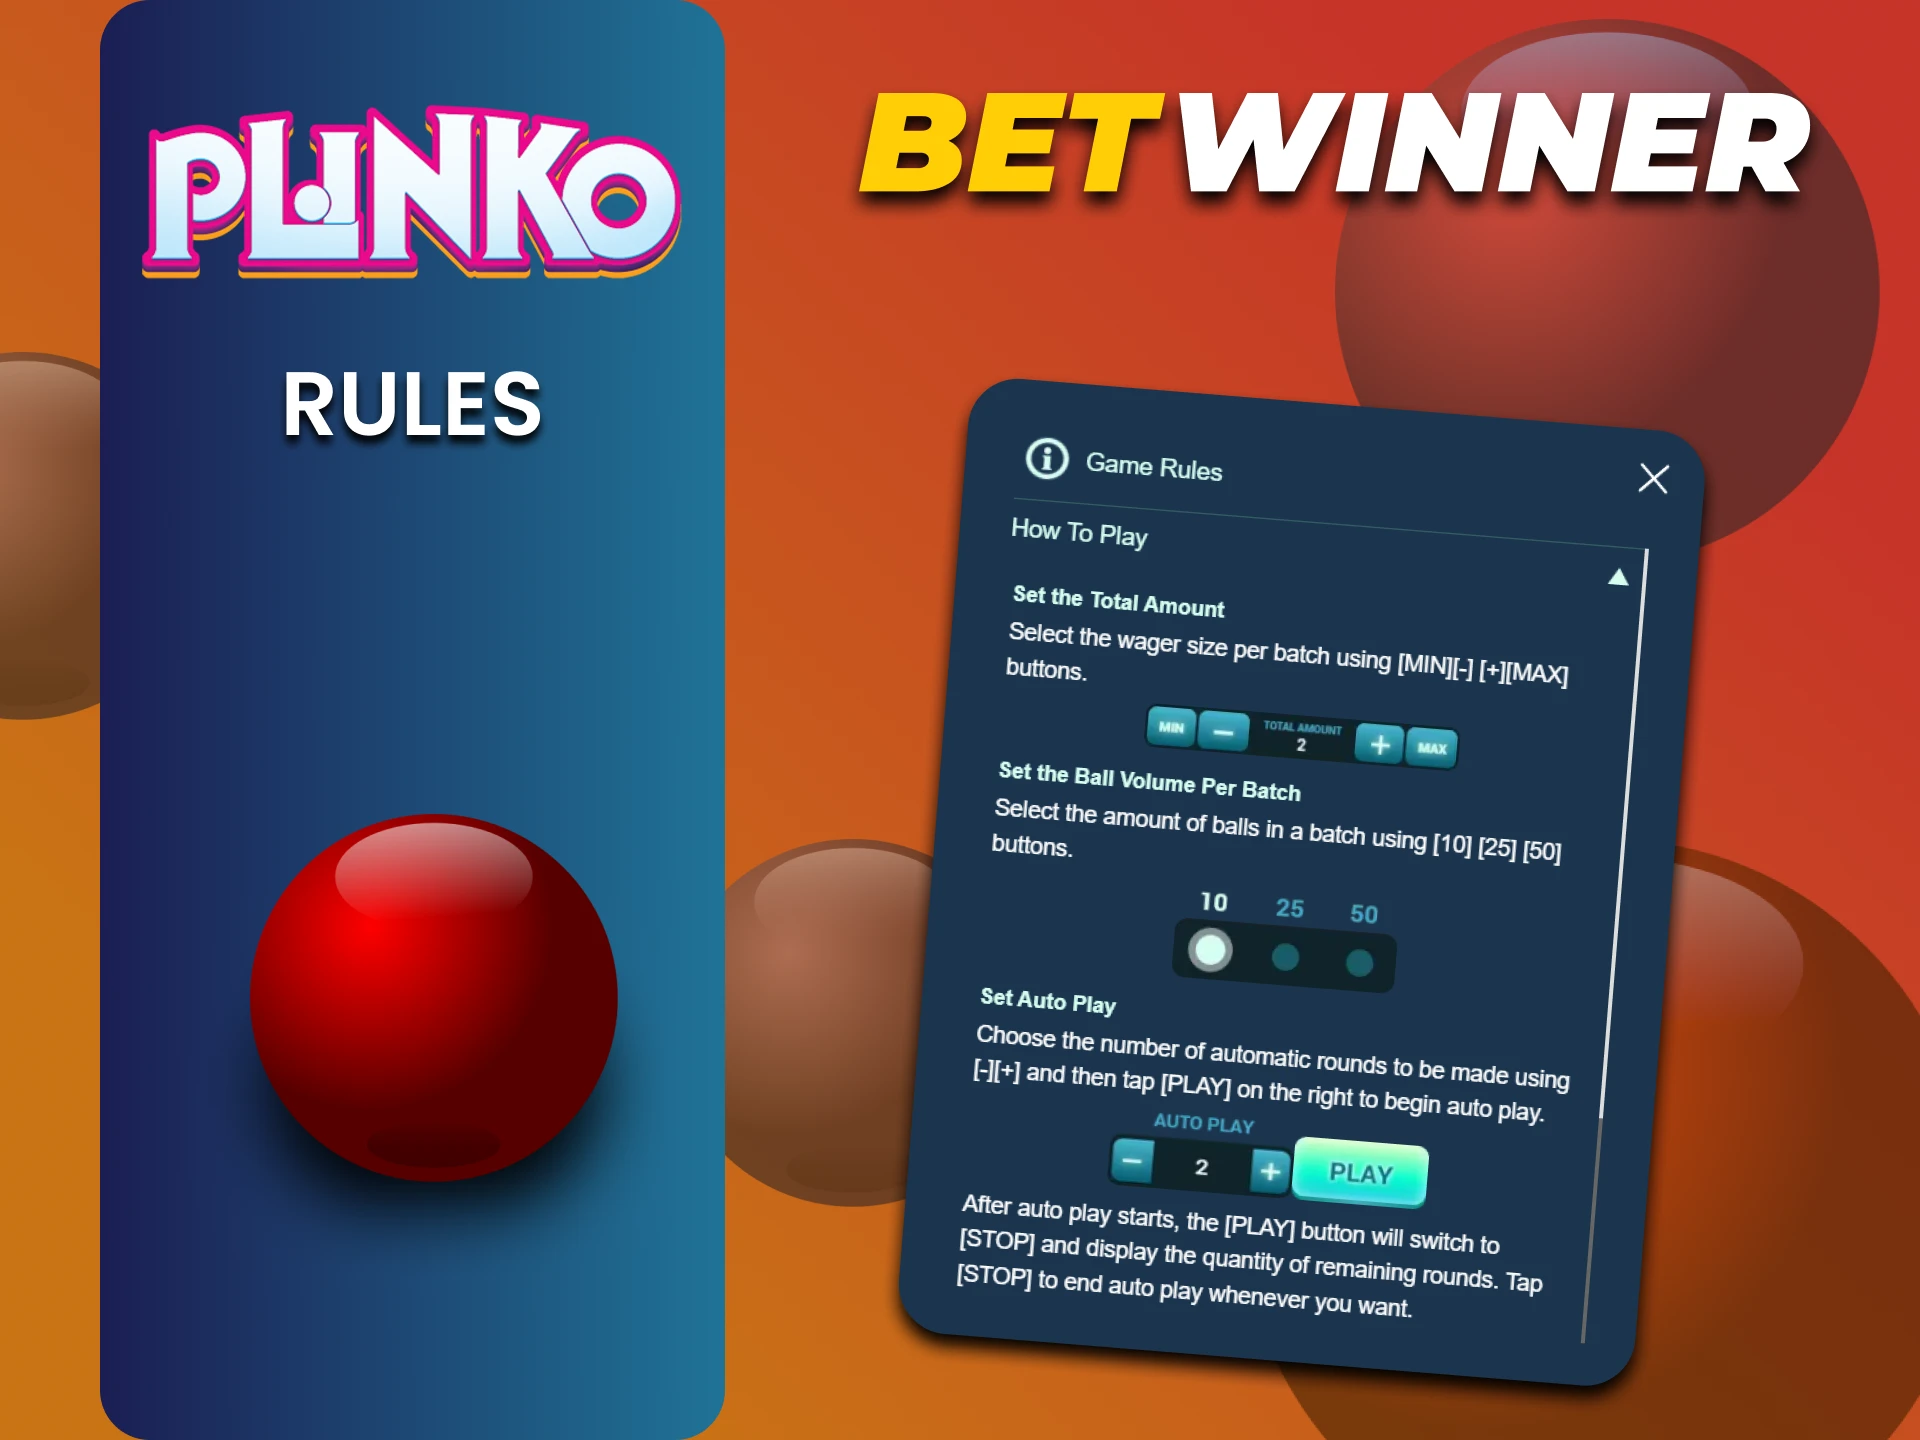 Learn the rules for winning Plinko at Betwinner.